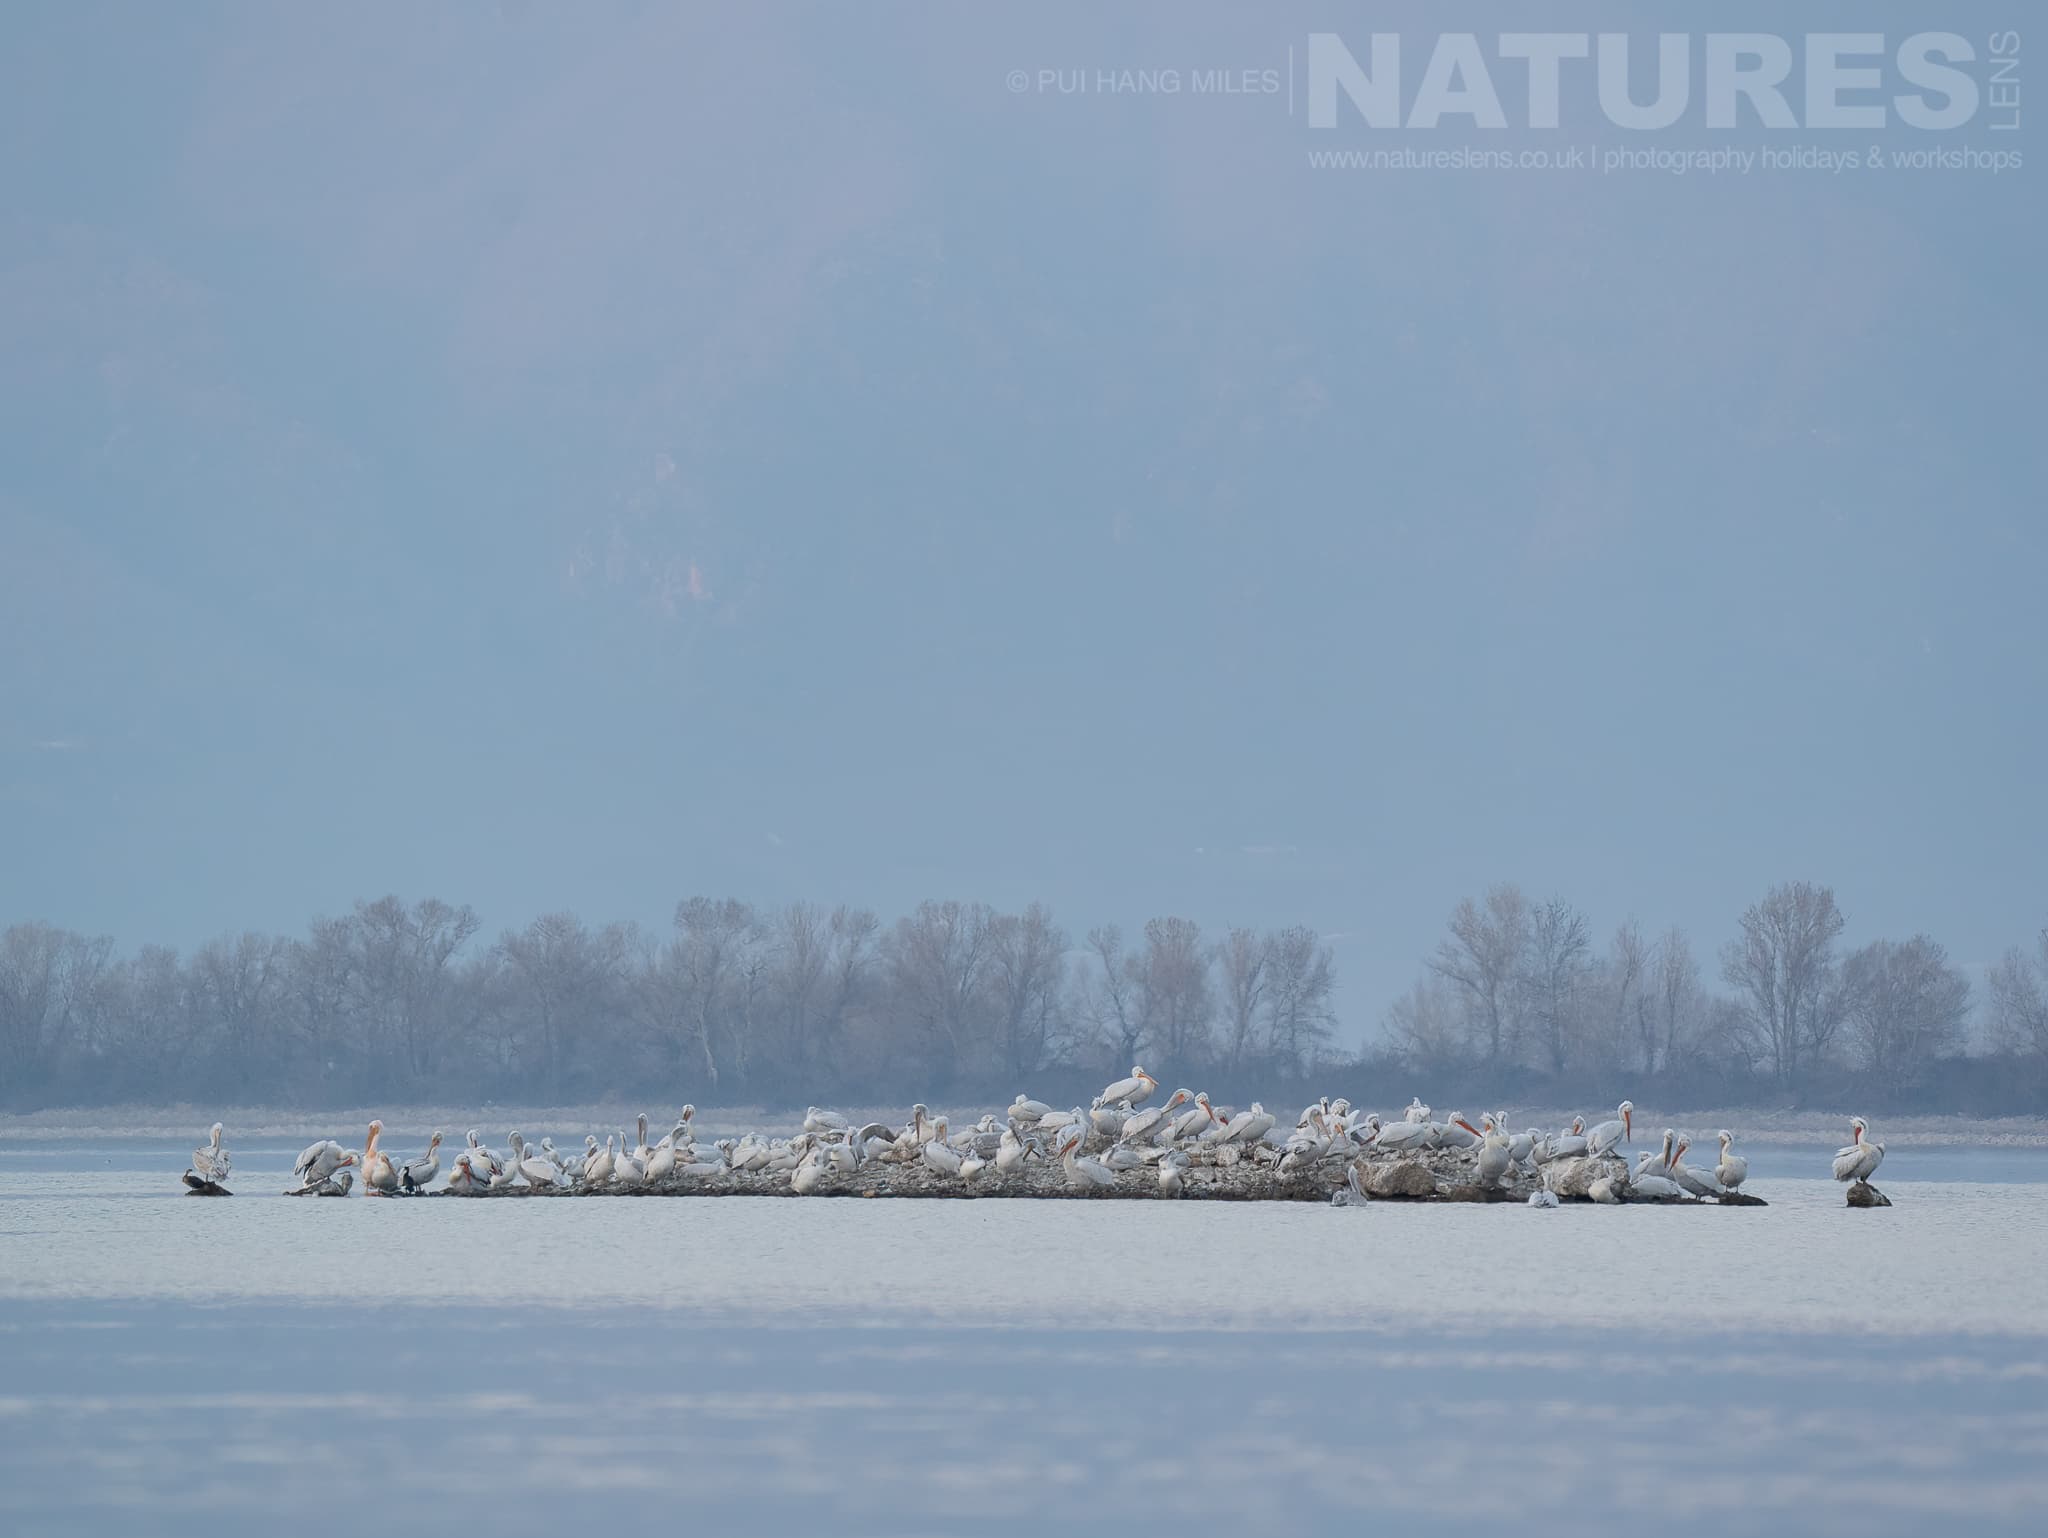 One Of The Nesting Sites Of The Pelicans Of Lake Kerkini Photographed During A Natureslens Pelicans Of Lake Kerkini Photography Holiday